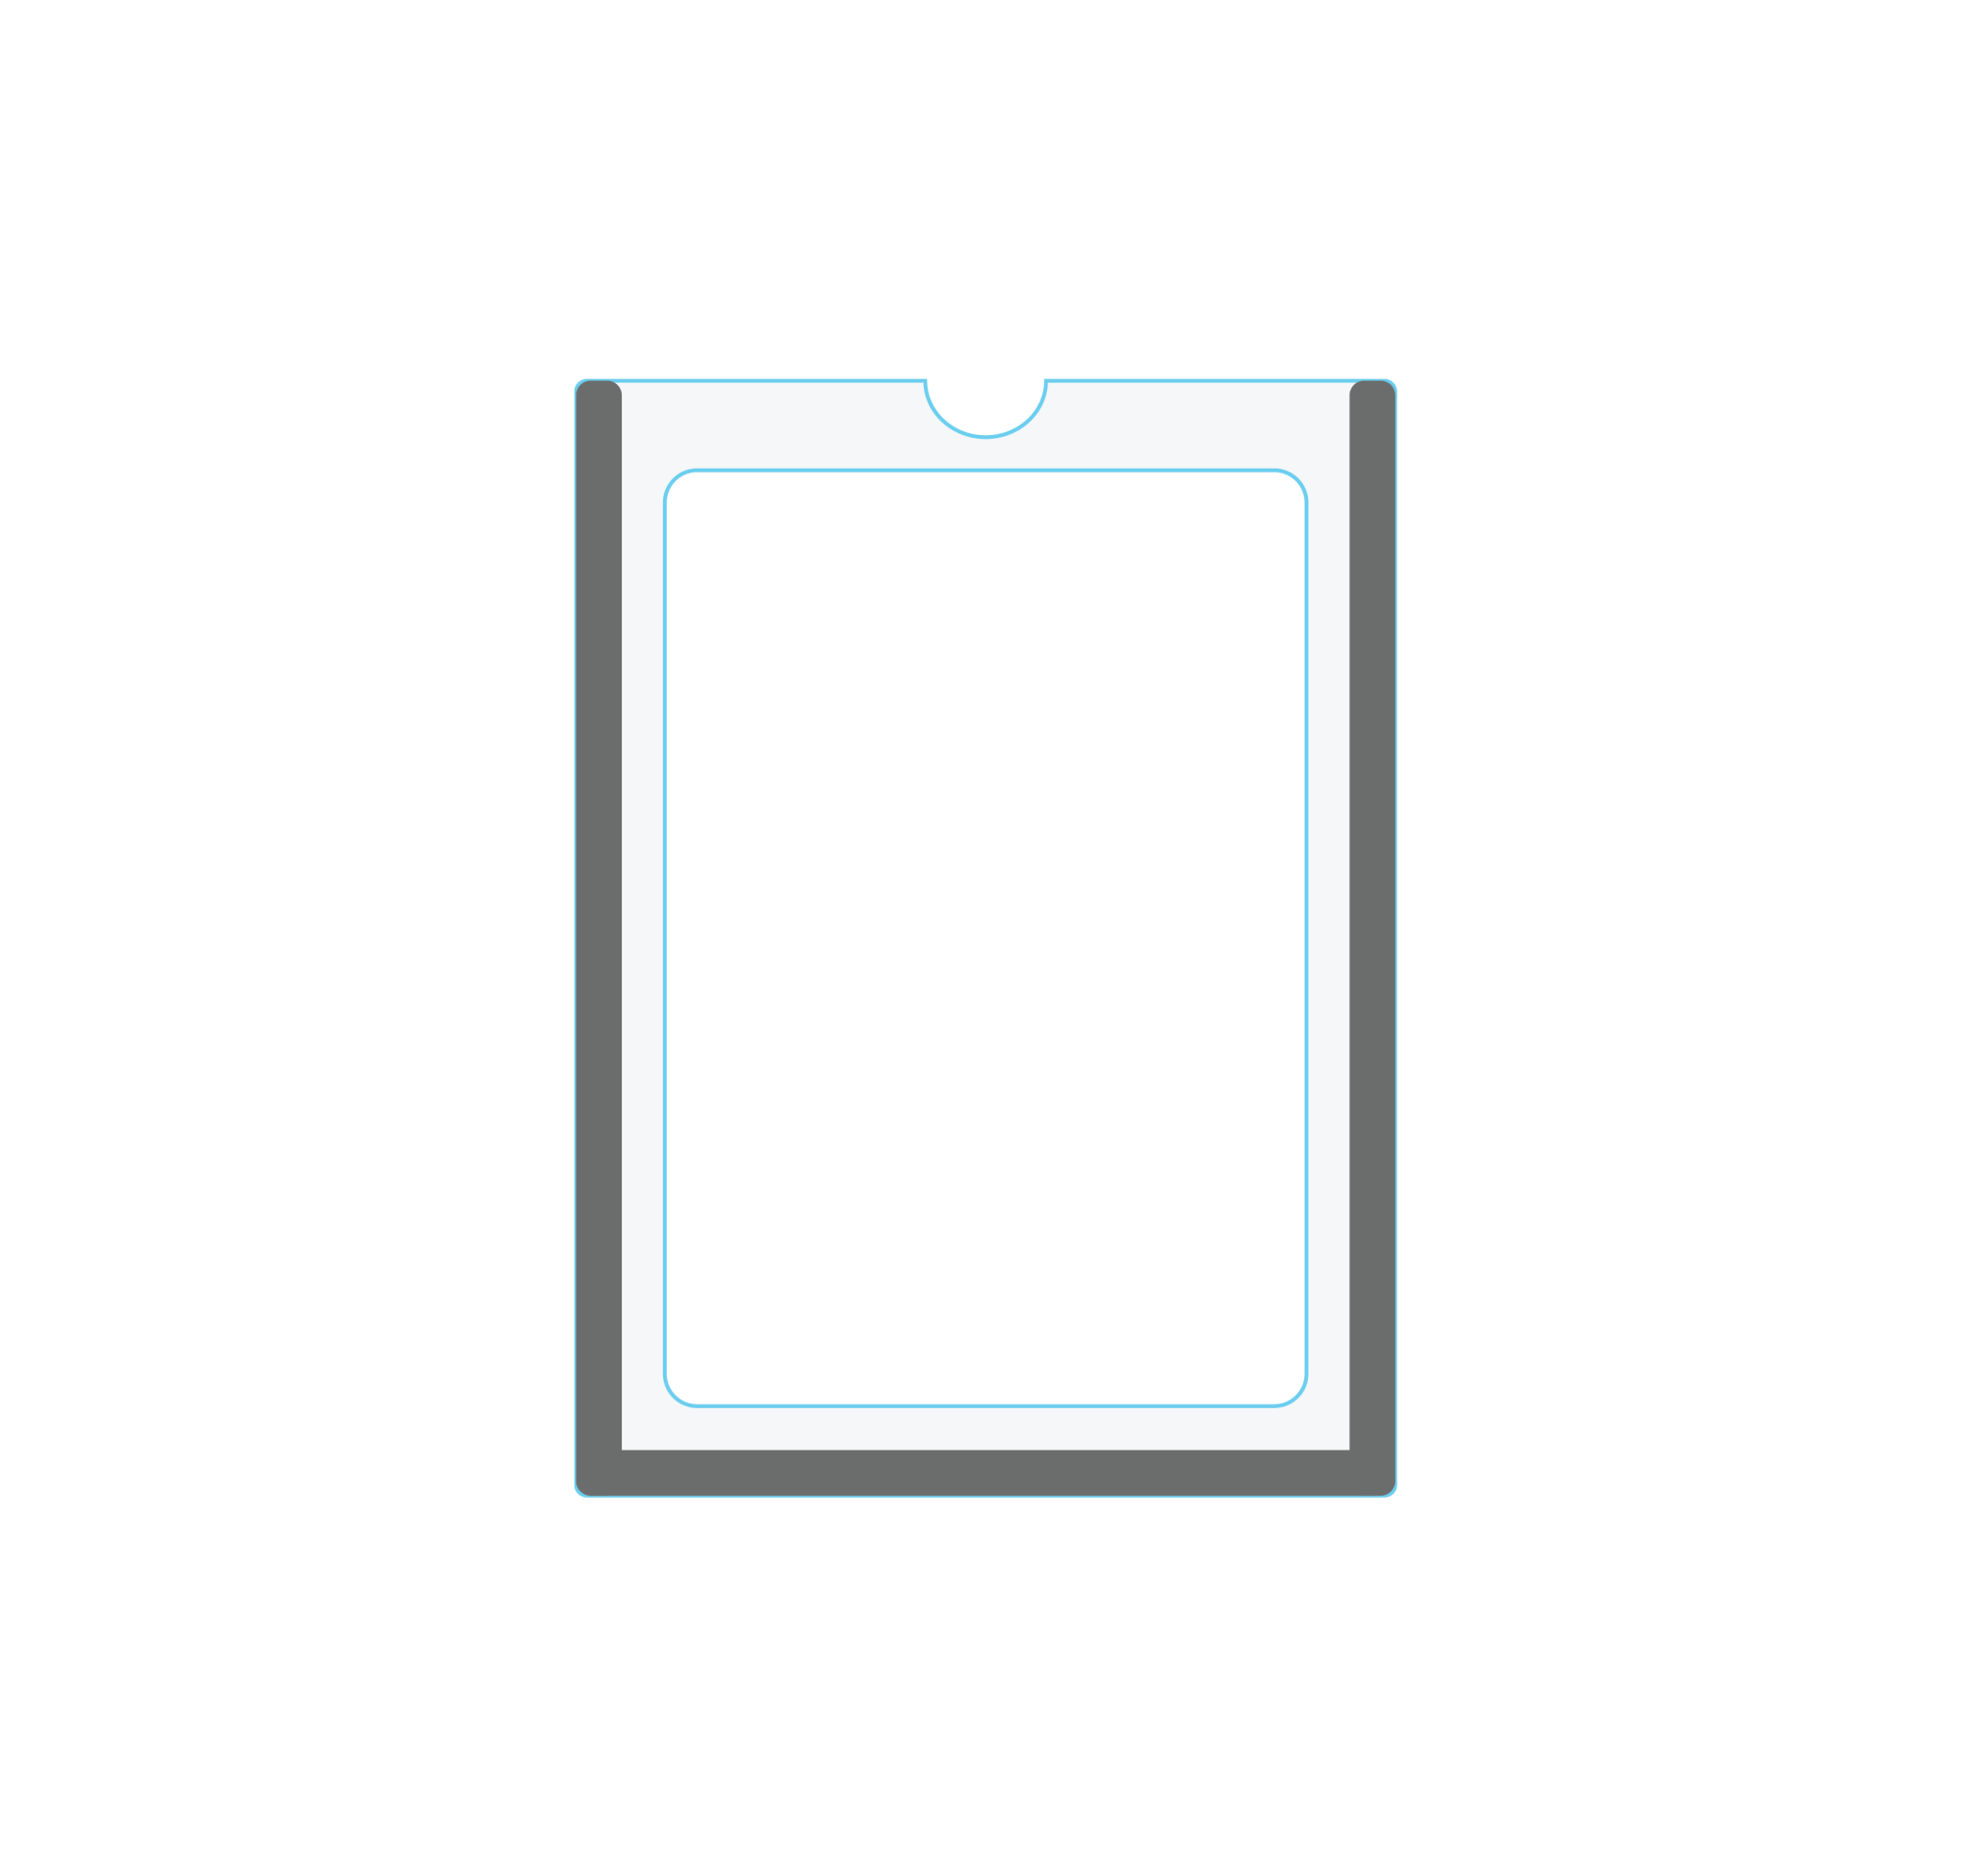 Magnetic Clear Acrylic Plexiglass Document Holder - (Pack of 10) 1/8" Thick. - CYANvisuals